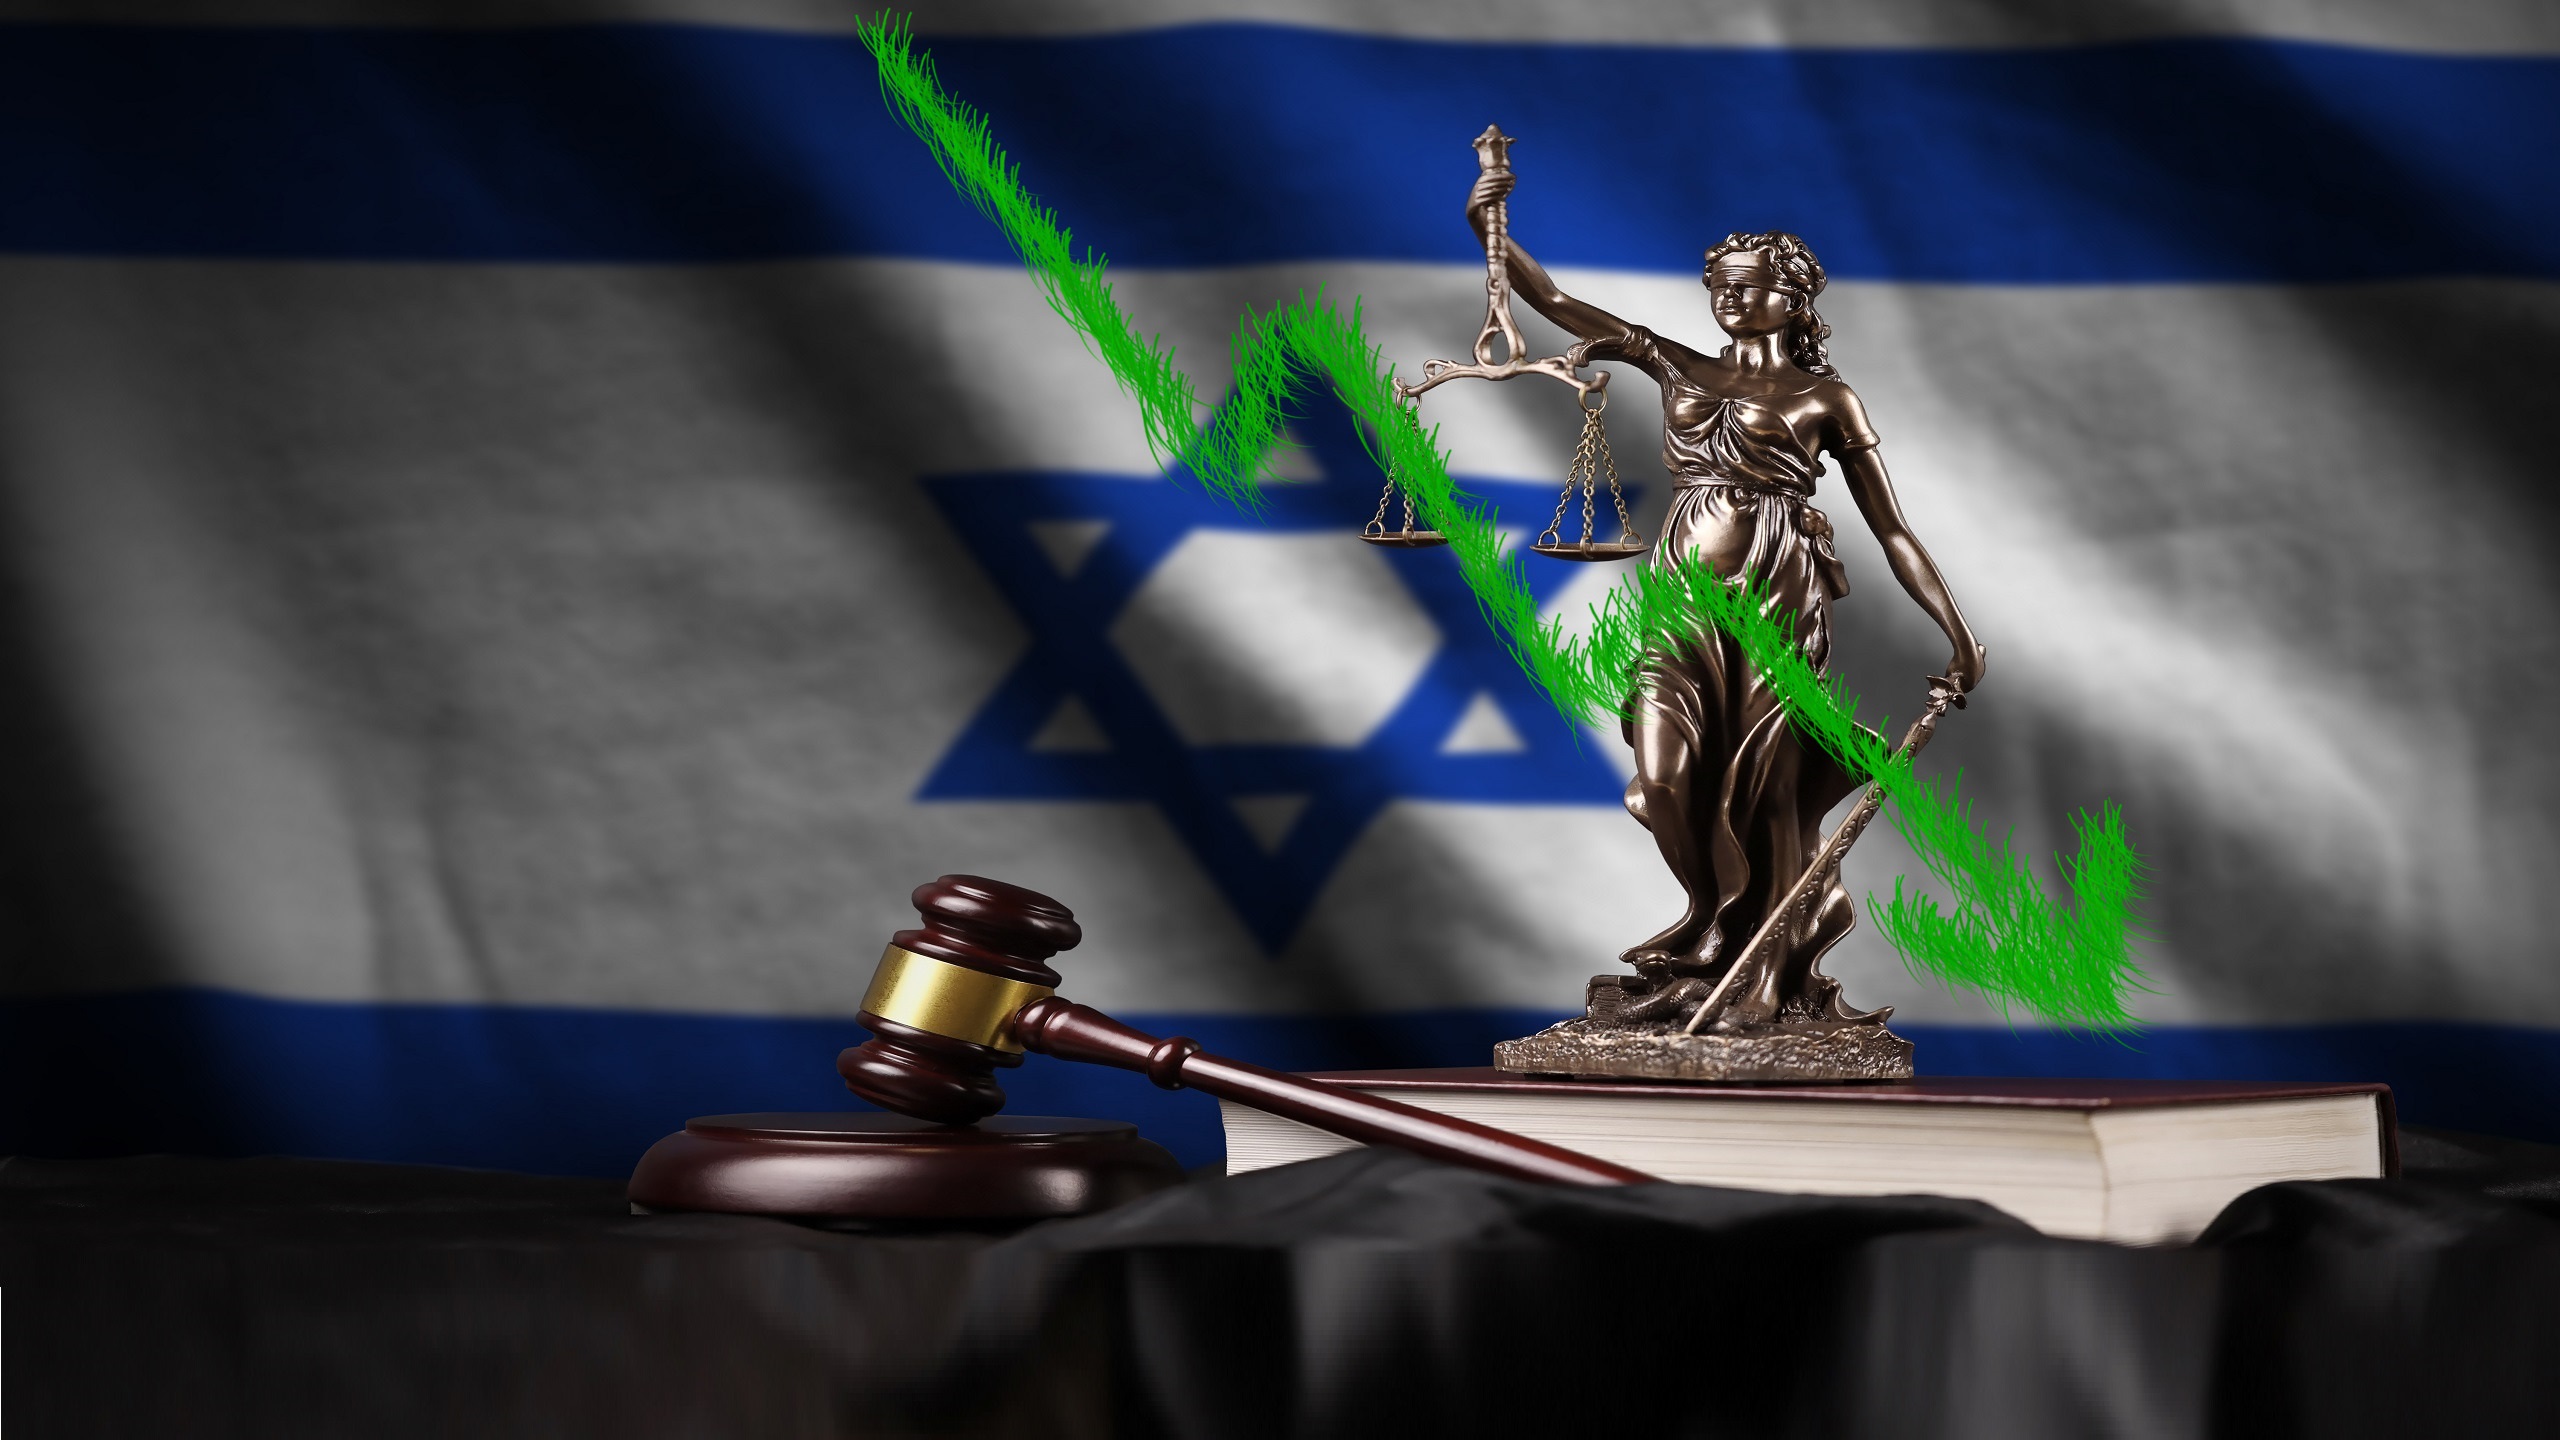 Fitch Ratings Warns Israel’s Judicial Reform Could Weaken Credit Profile